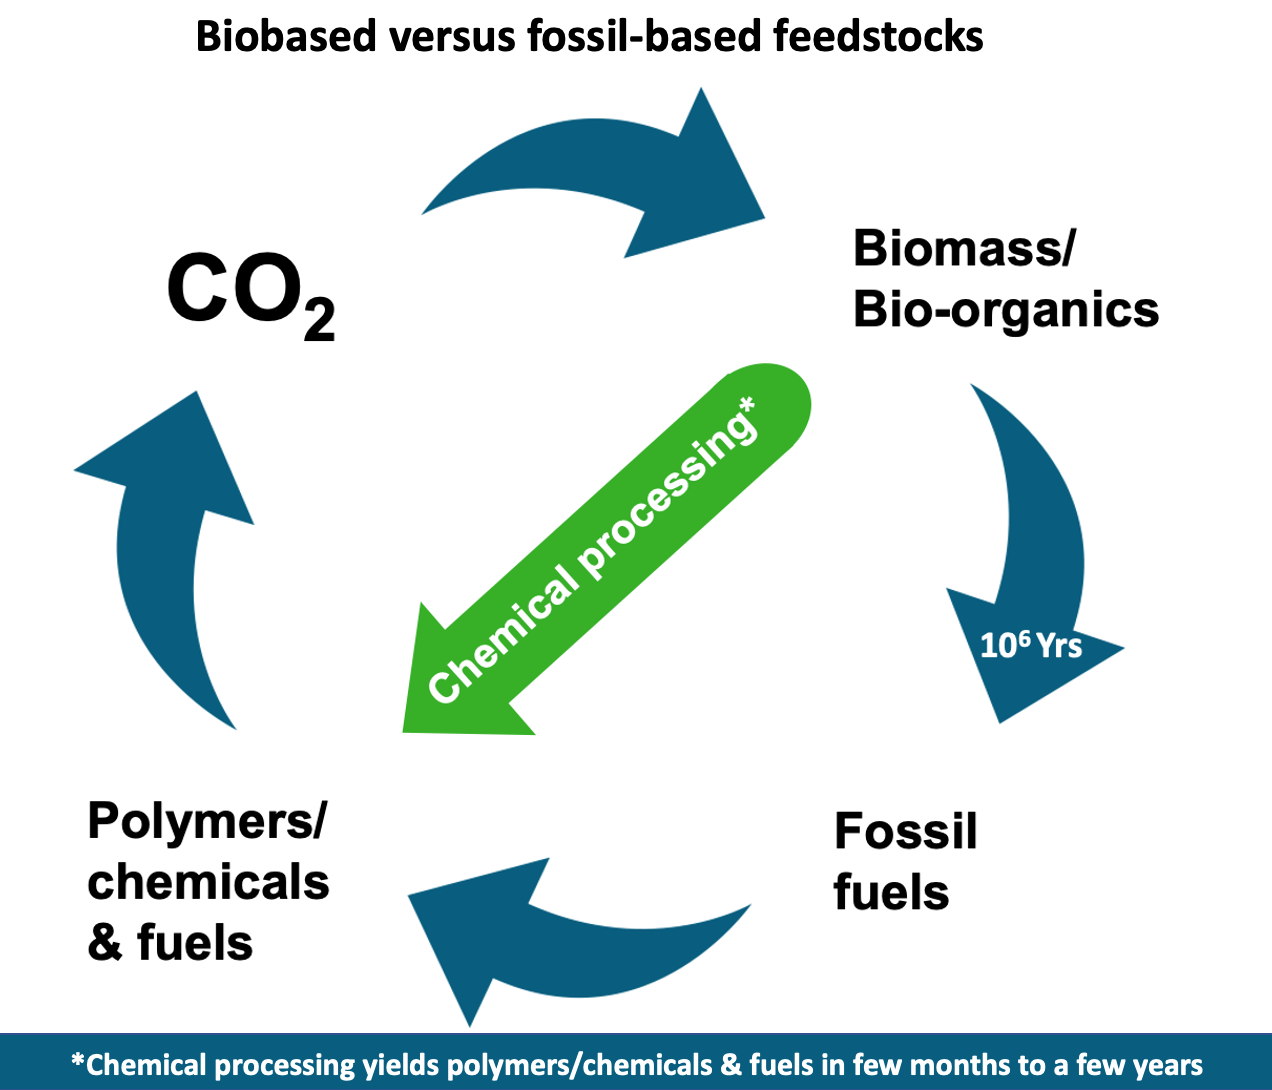 An infographic showing how a biomaterial value chain can achieve in months what nature takes centuries to produce. 